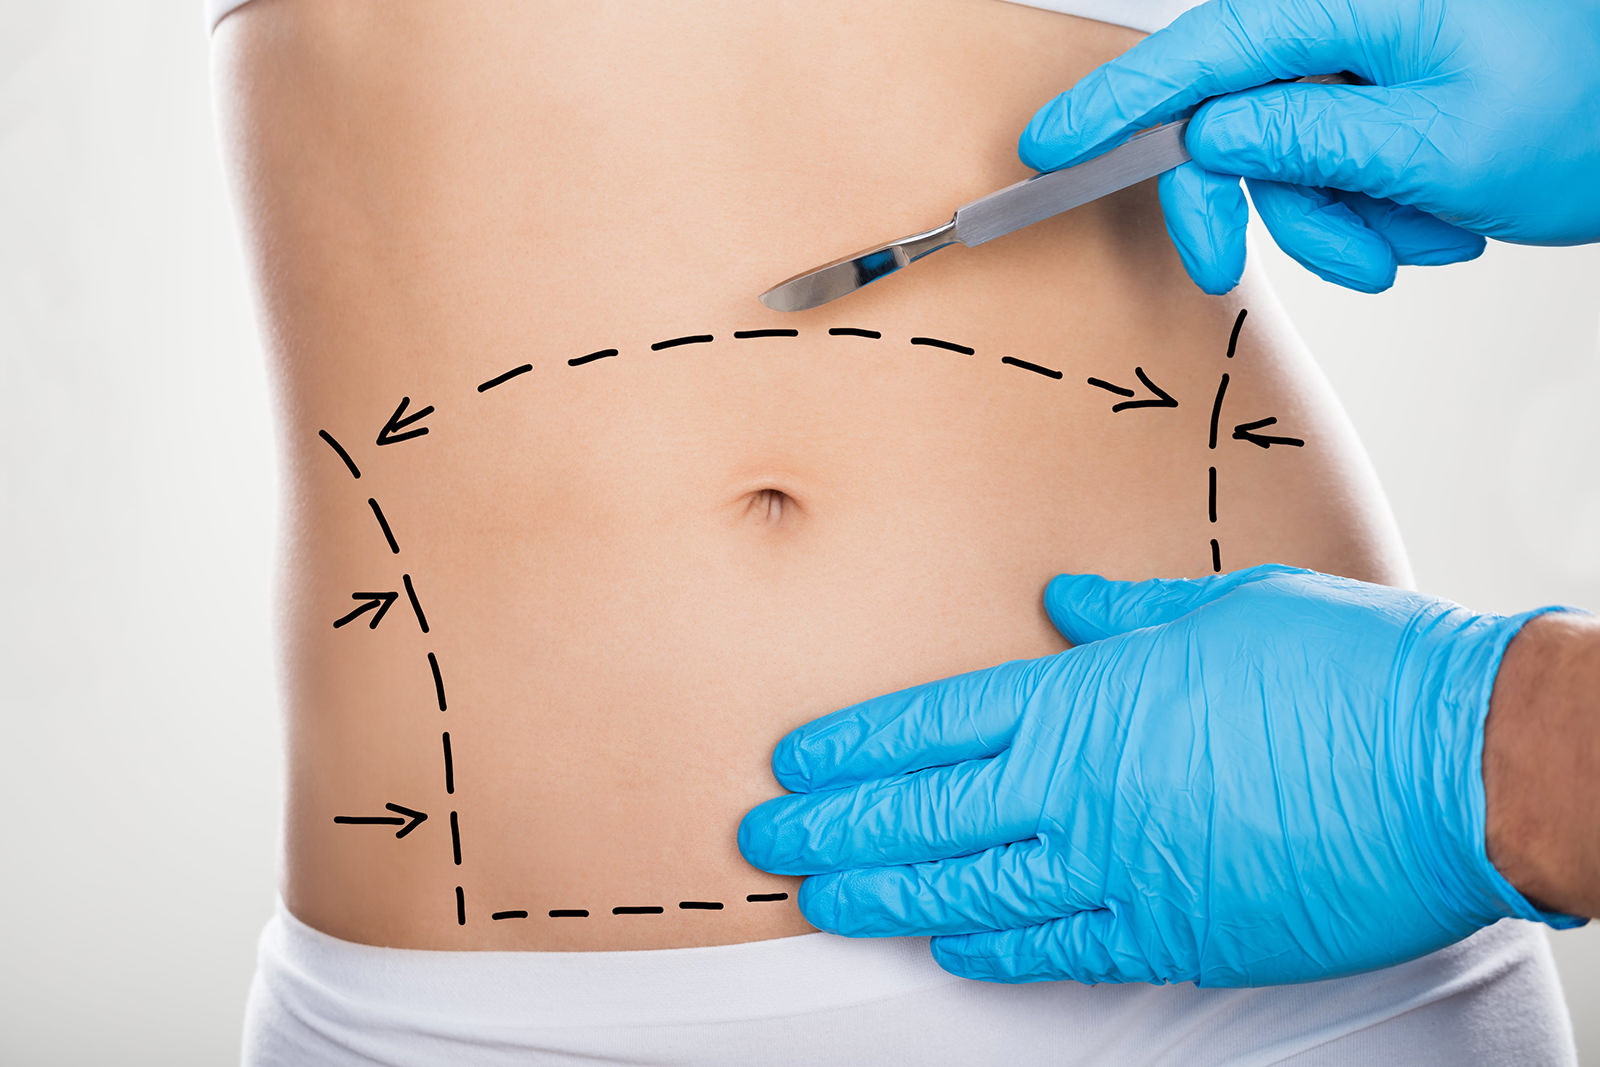 What is the Cost of Liposuction| Body Contouring Procedure in India